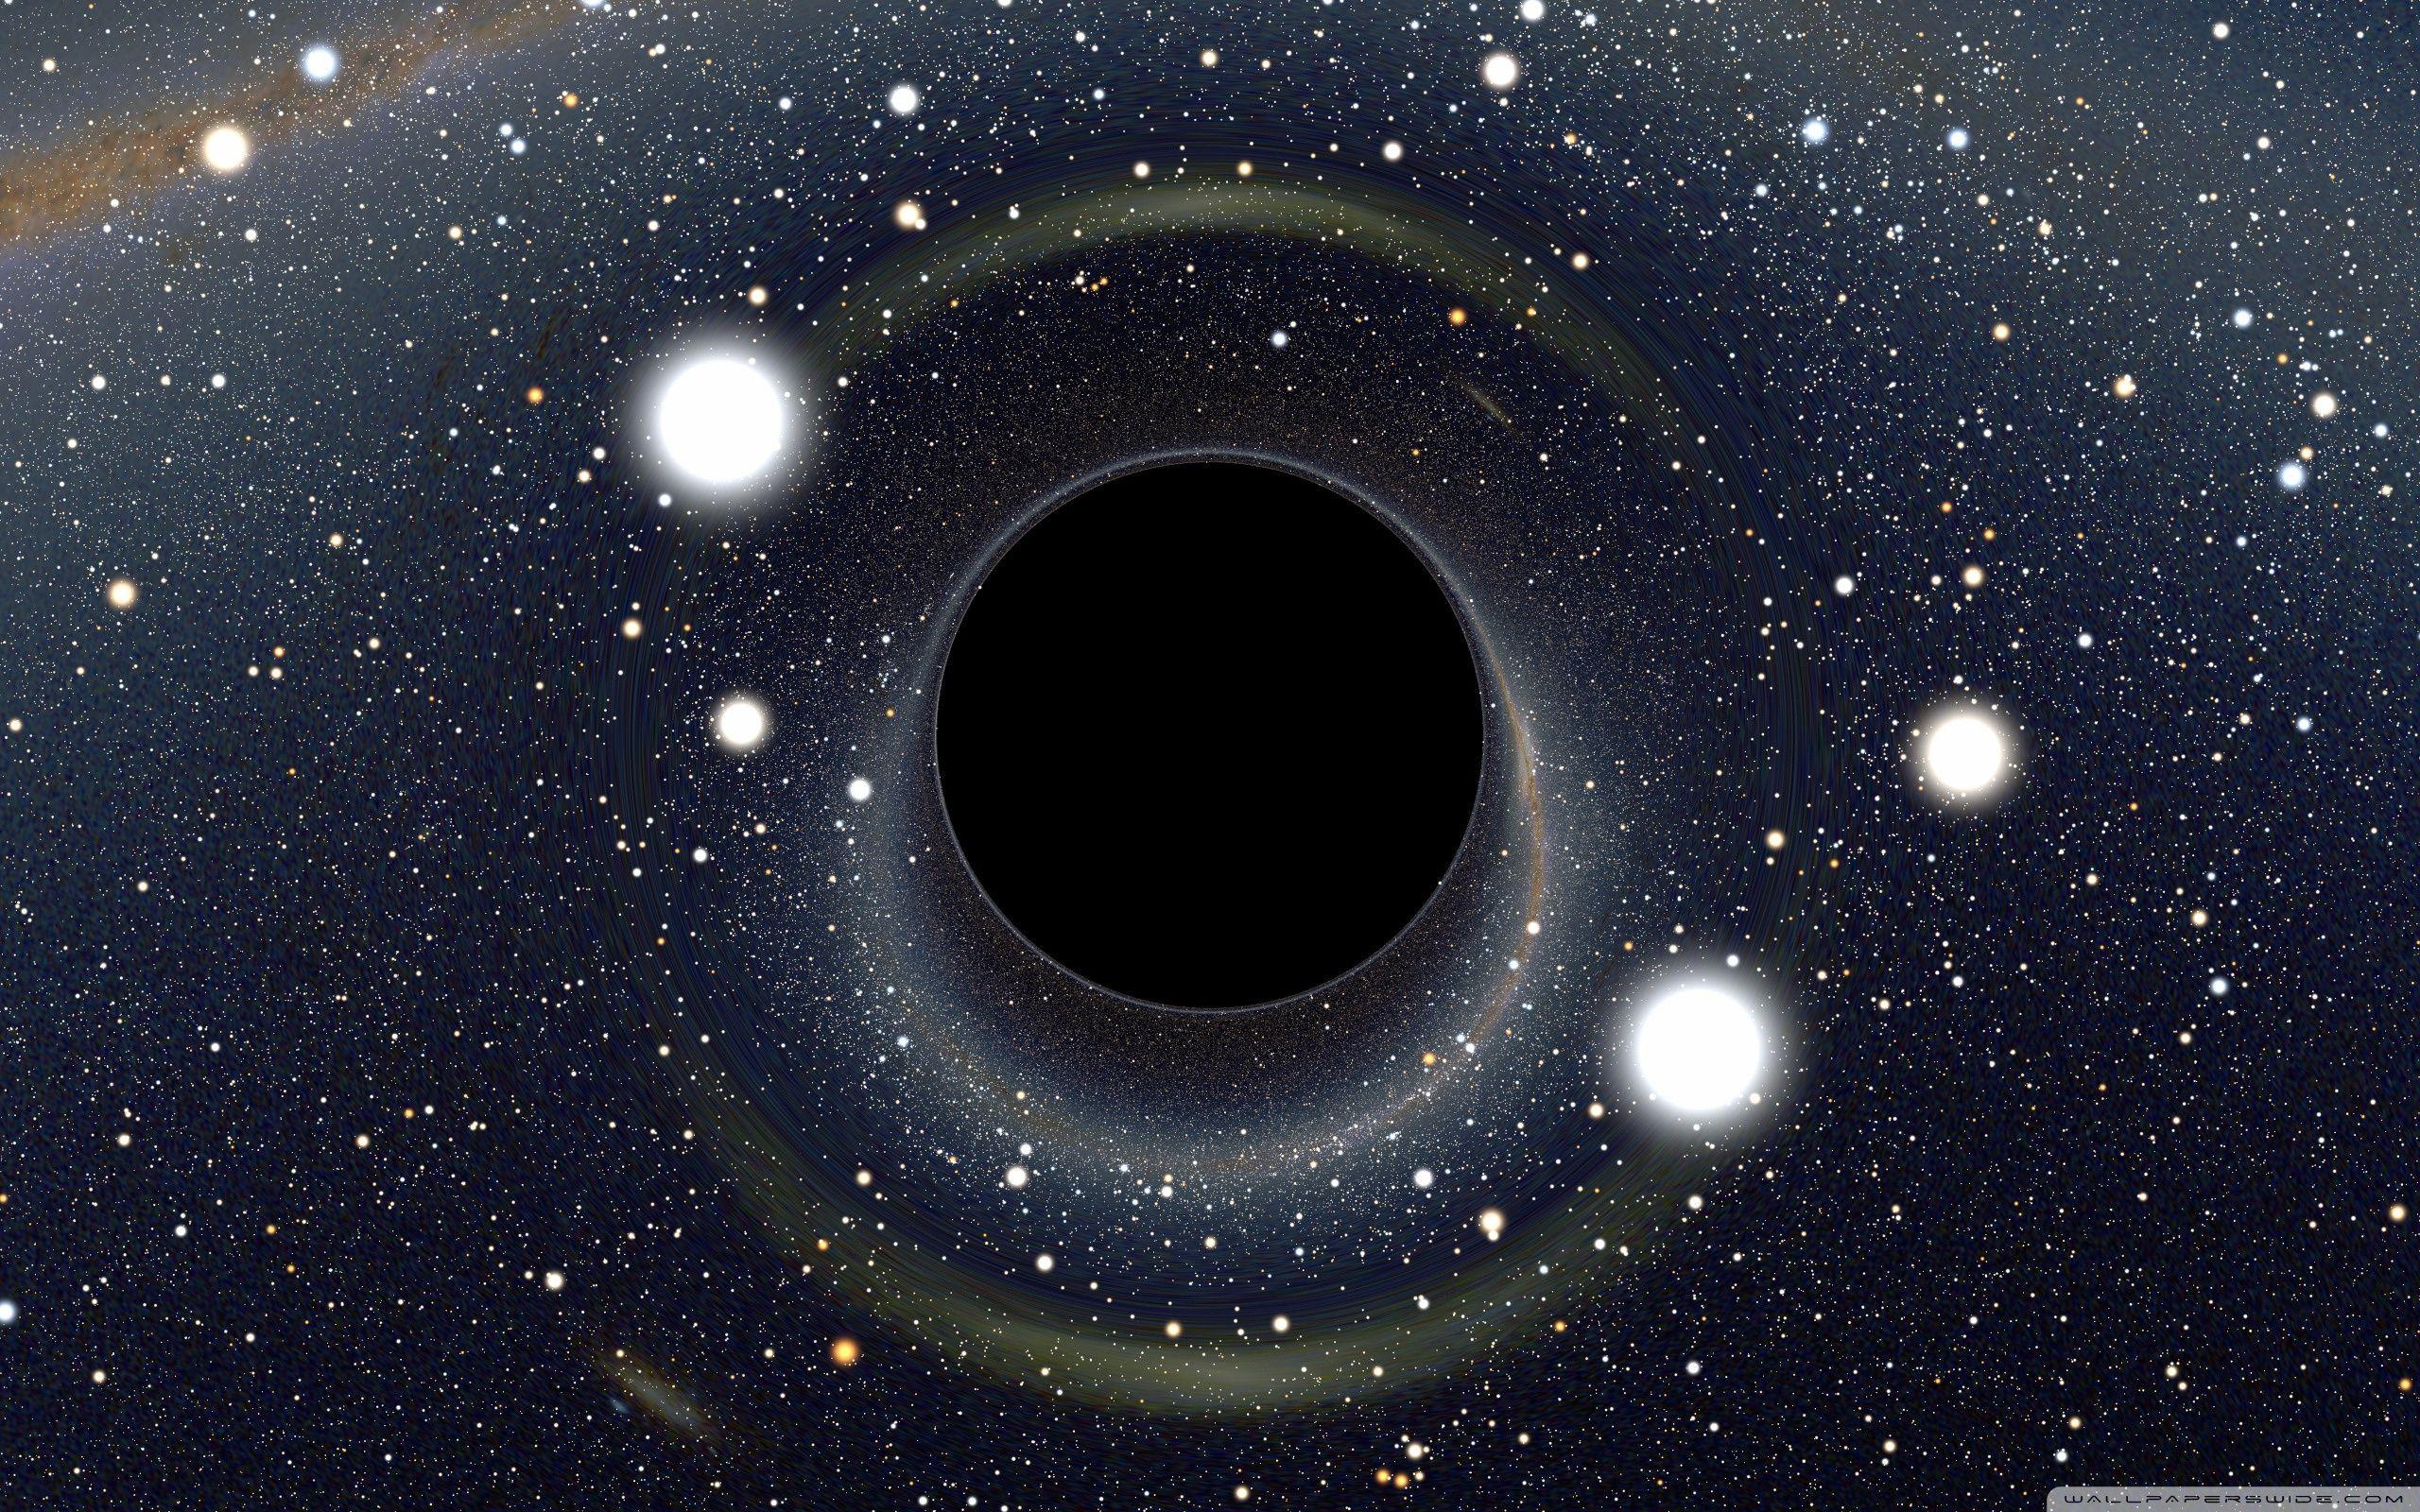 Black Hole High Resolution Wallpapers Top Free Black Hole High Images, Photos, Reviews